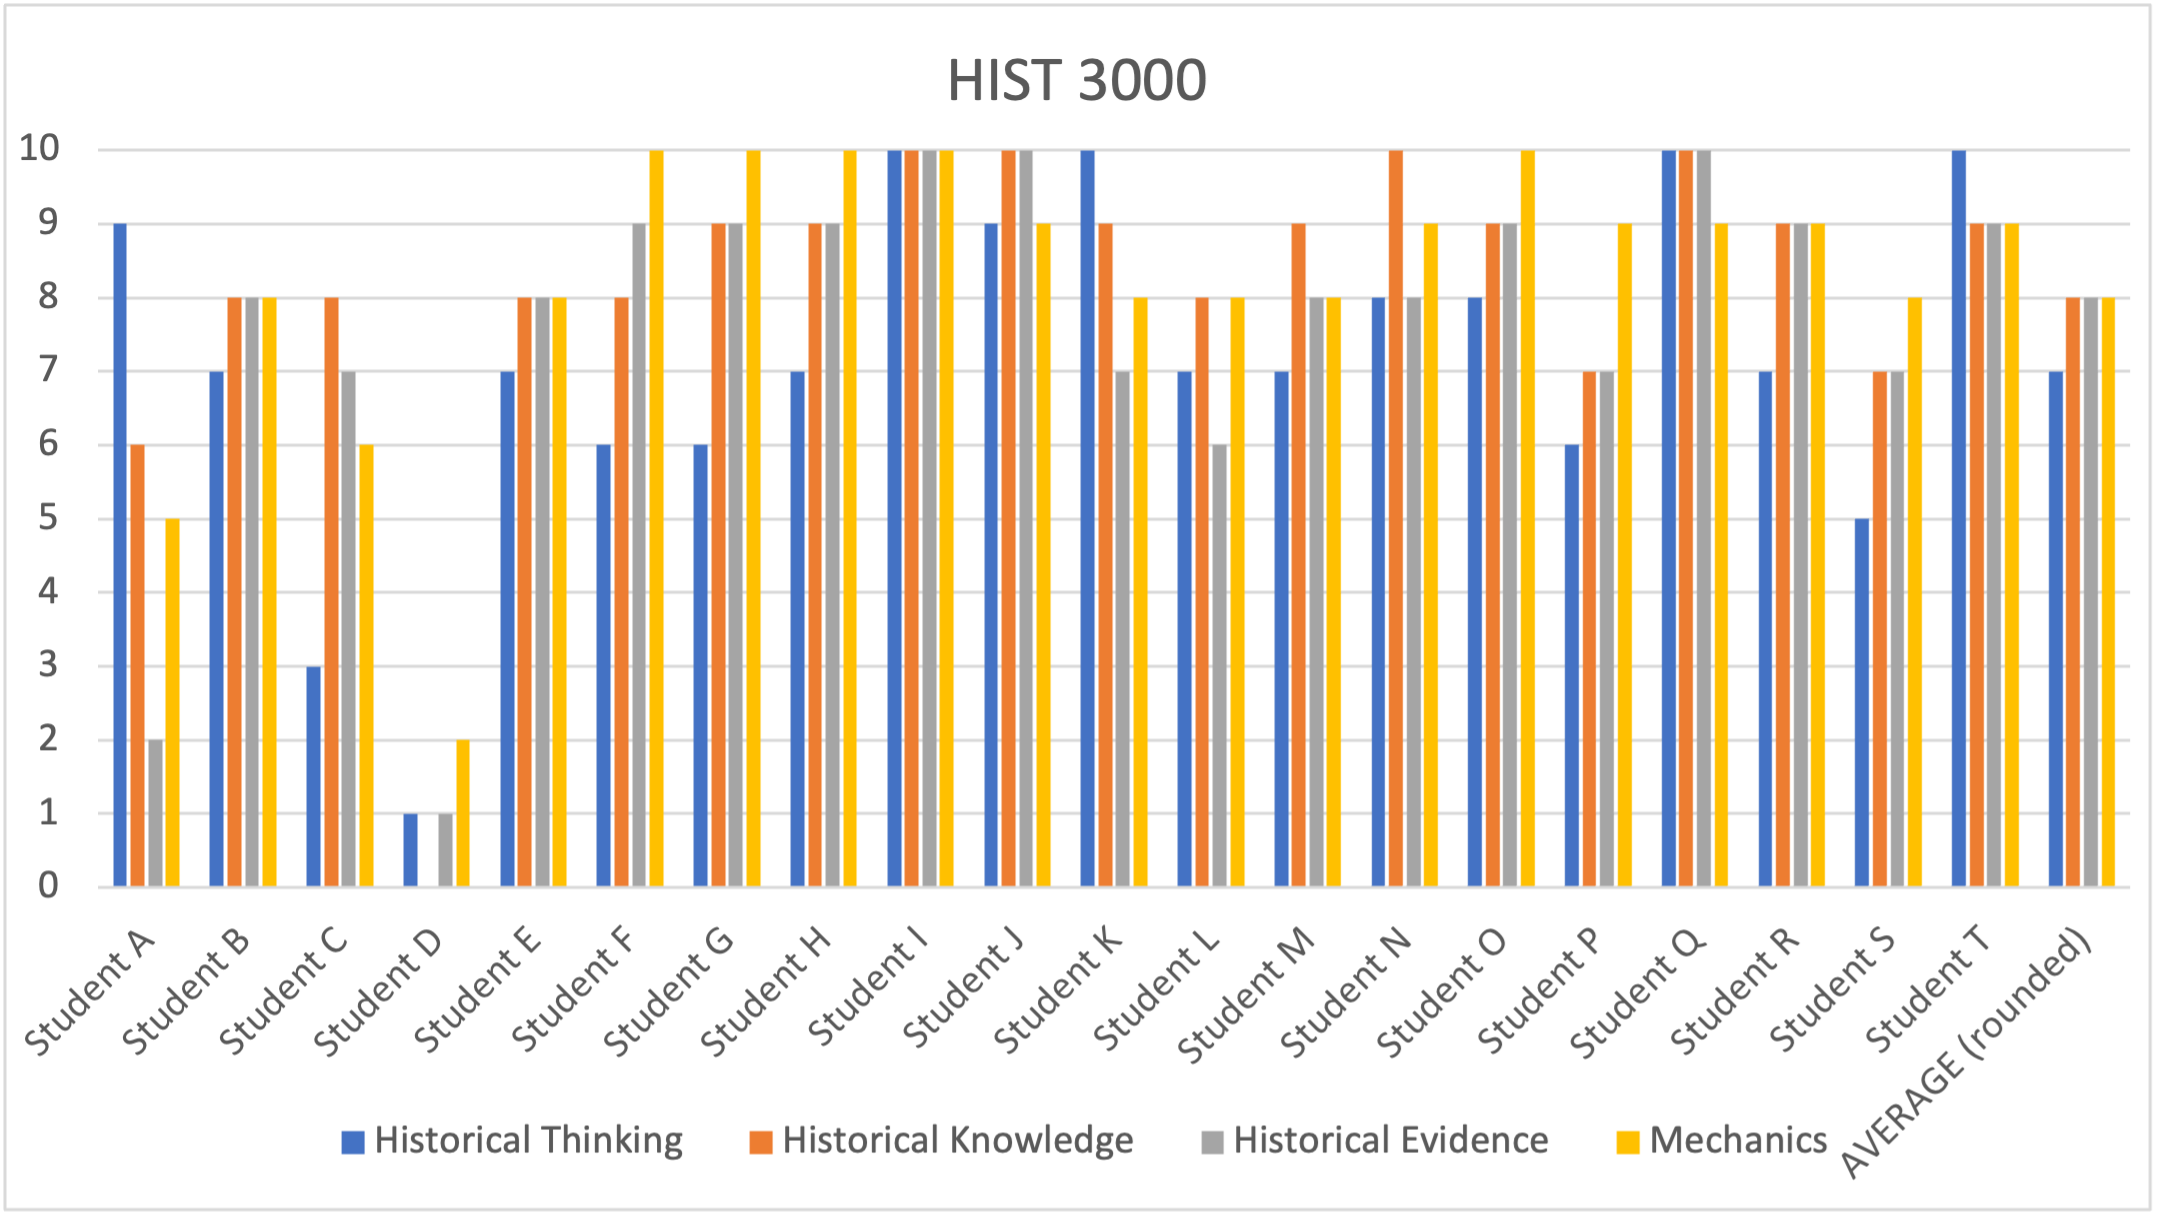 Bar graph showing data from HIST 3000 table above